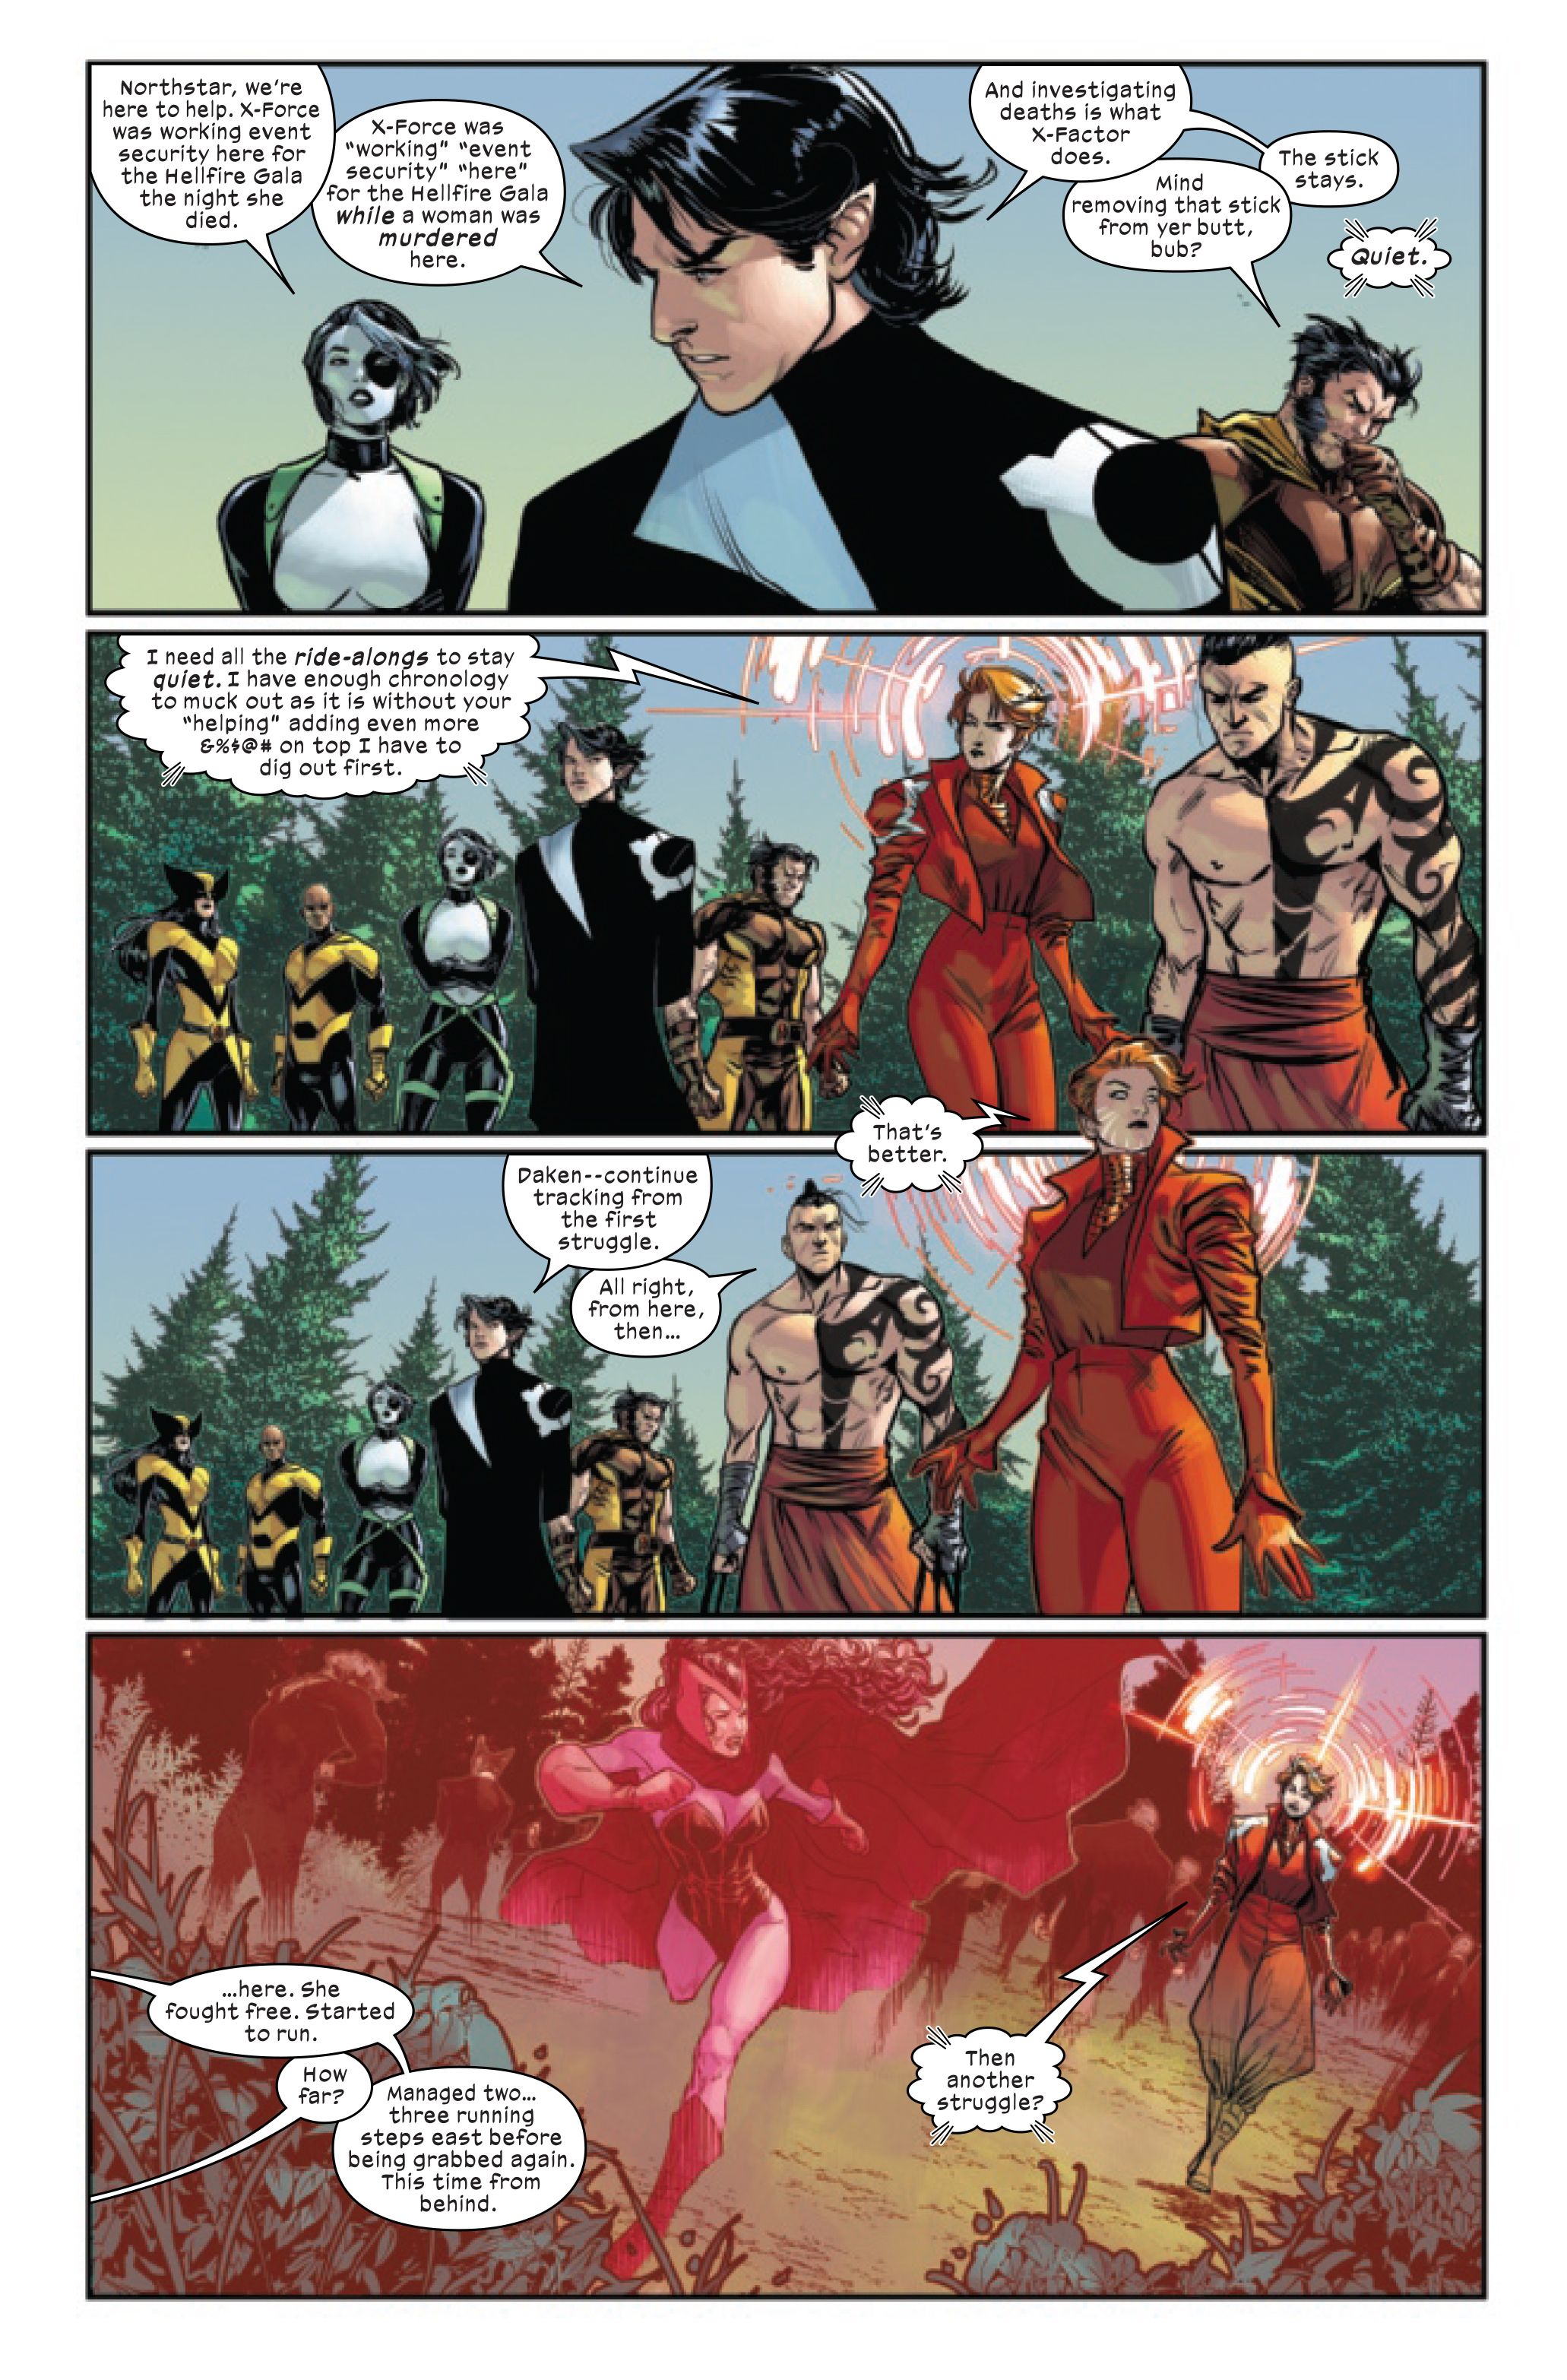 Page 2 of X-Men: The Trial of Magneto #1, by Leah Williams and Lucas Werneck. 